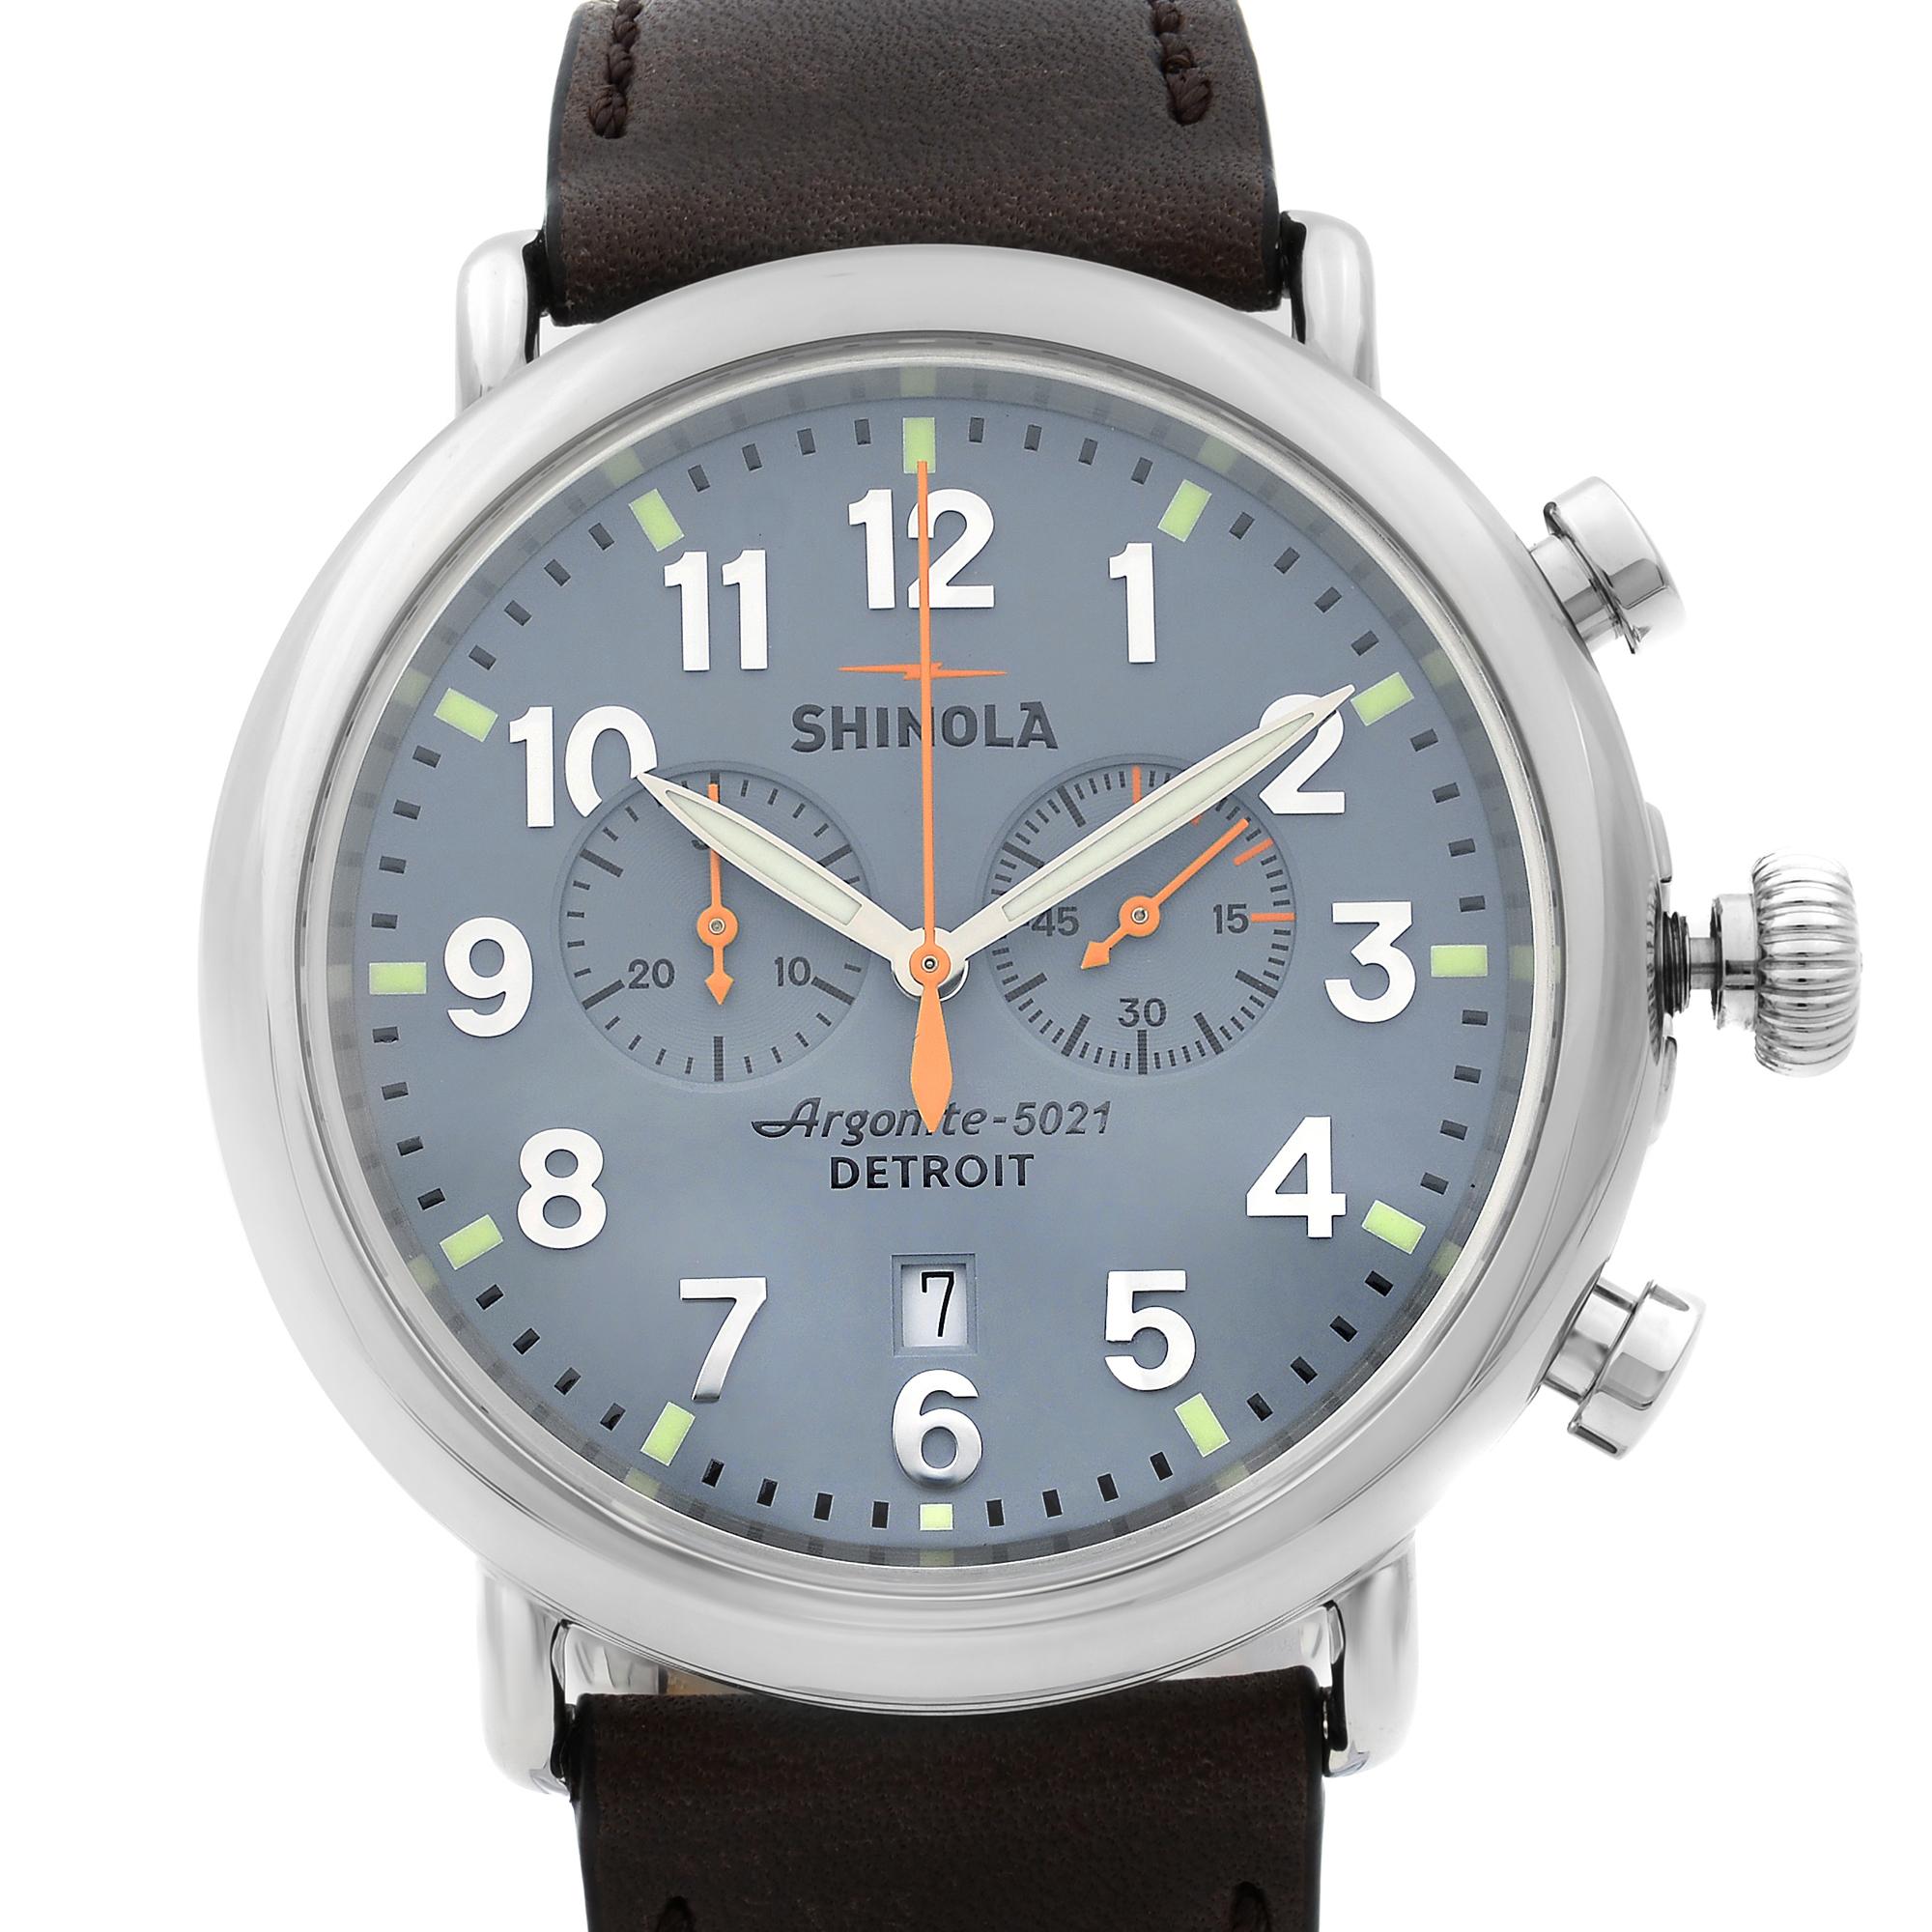 This pre-owned Like new (Store Display with defects on band) Shinola Runwell  S0110000167 is a beautiful men's timepiece that is powered by quartz (battery) movement which is cased in a stainless steel case. It has a round shape face, chronograph,